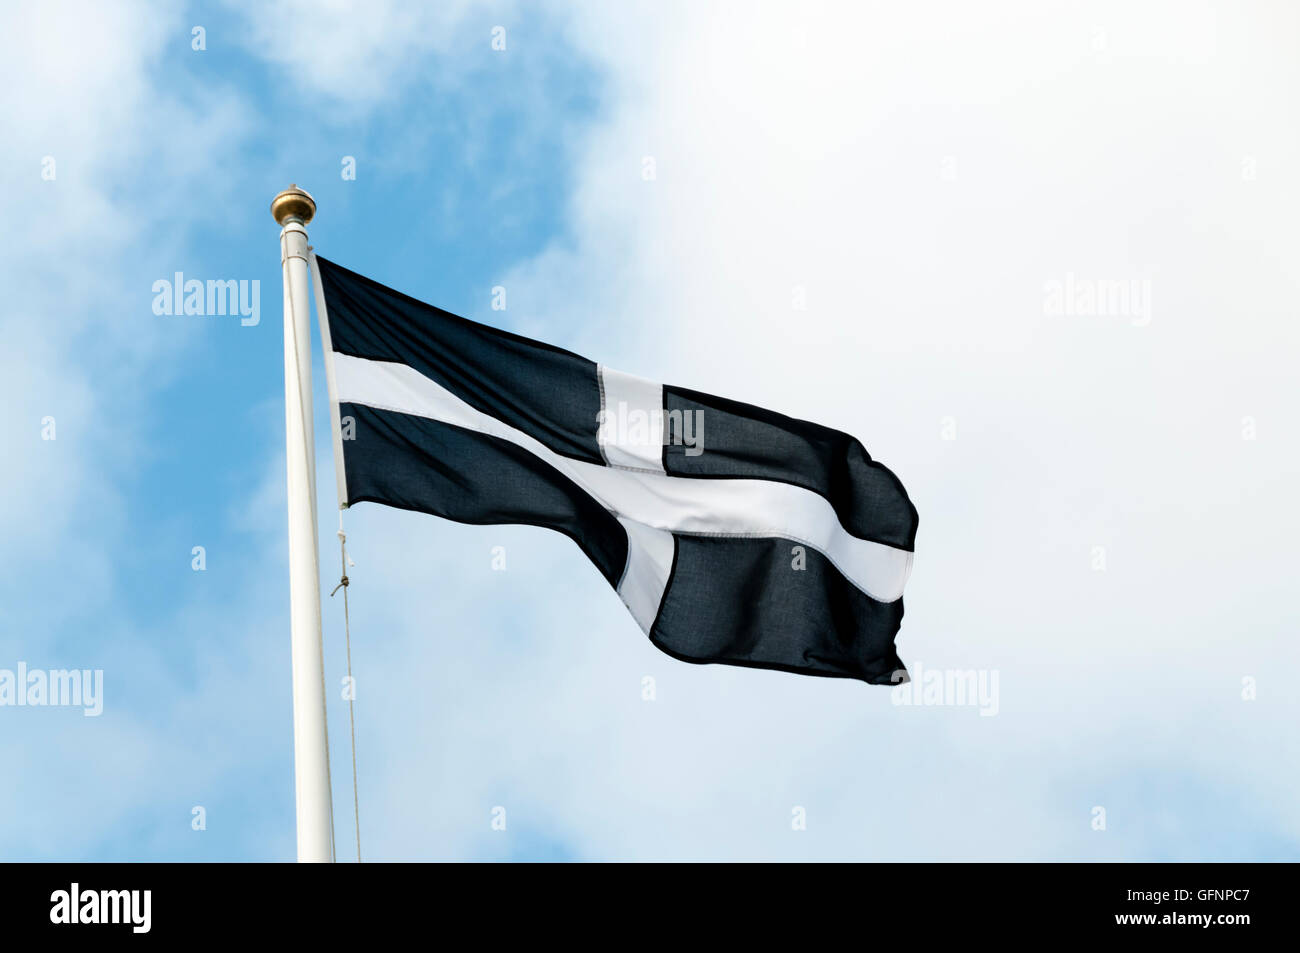 The Cornish flag flying in front of a blue sky. Stock Photo